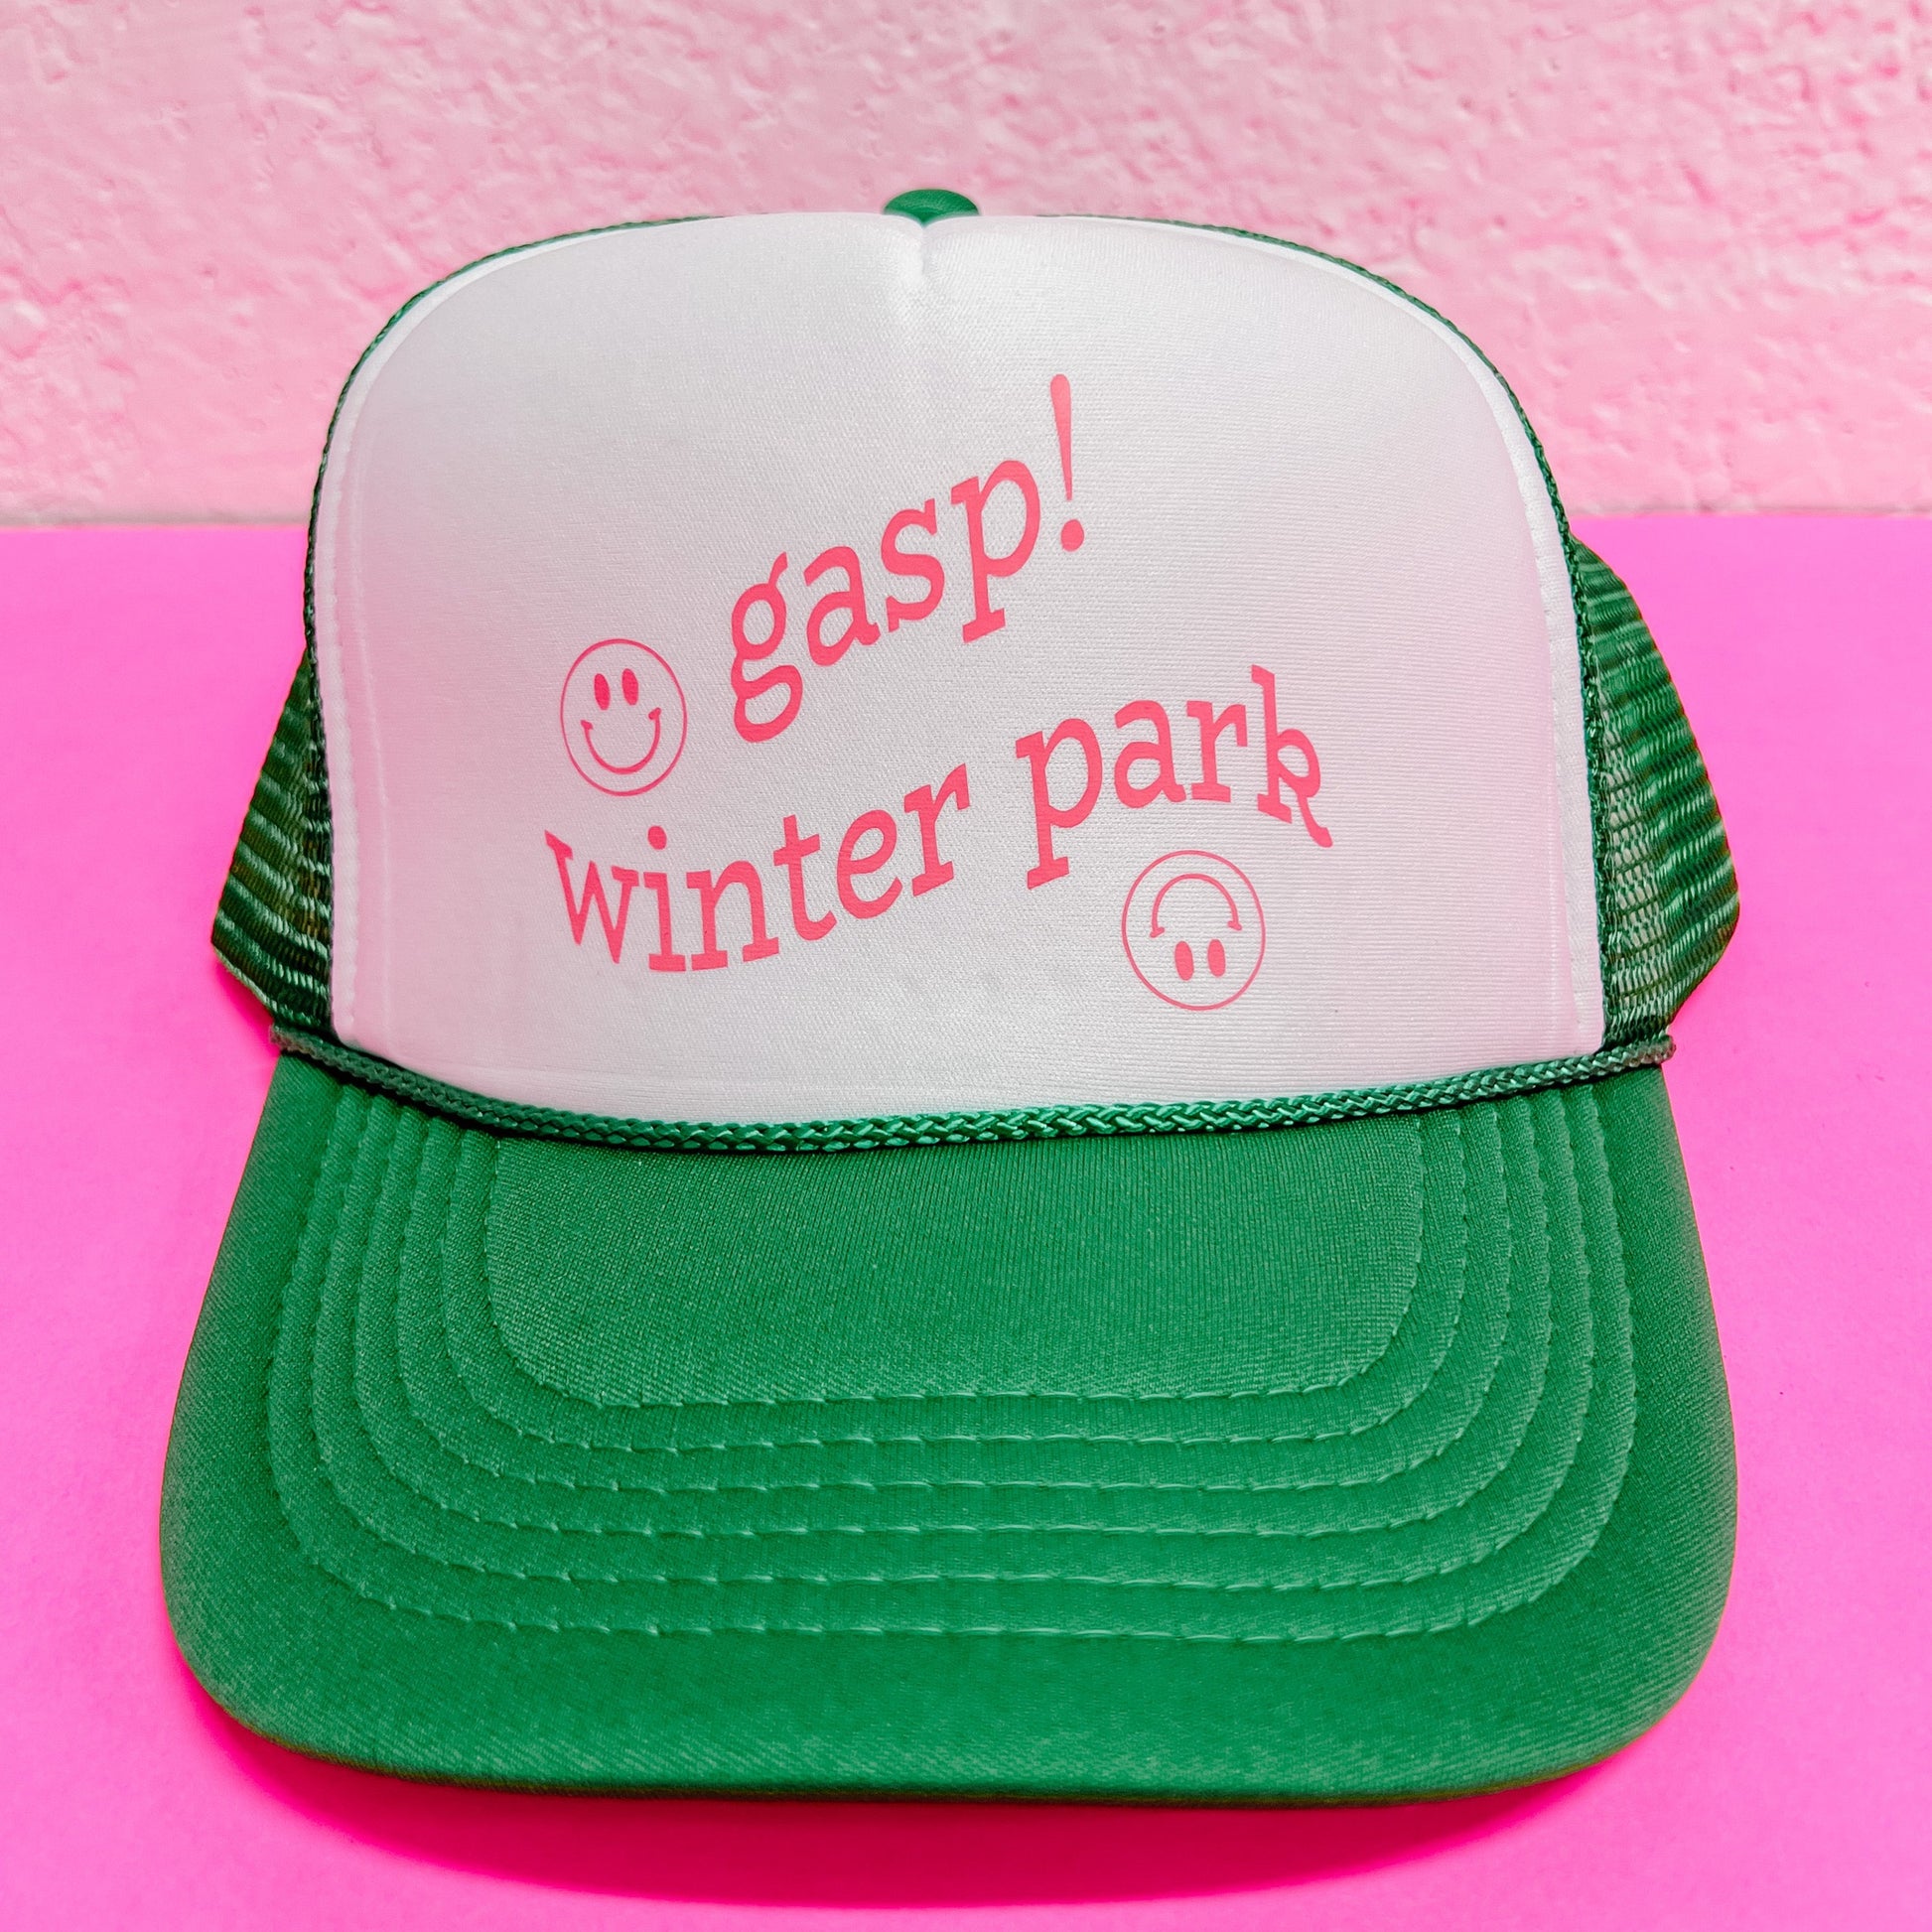 Trendy green and white trucker hat with smiley design.